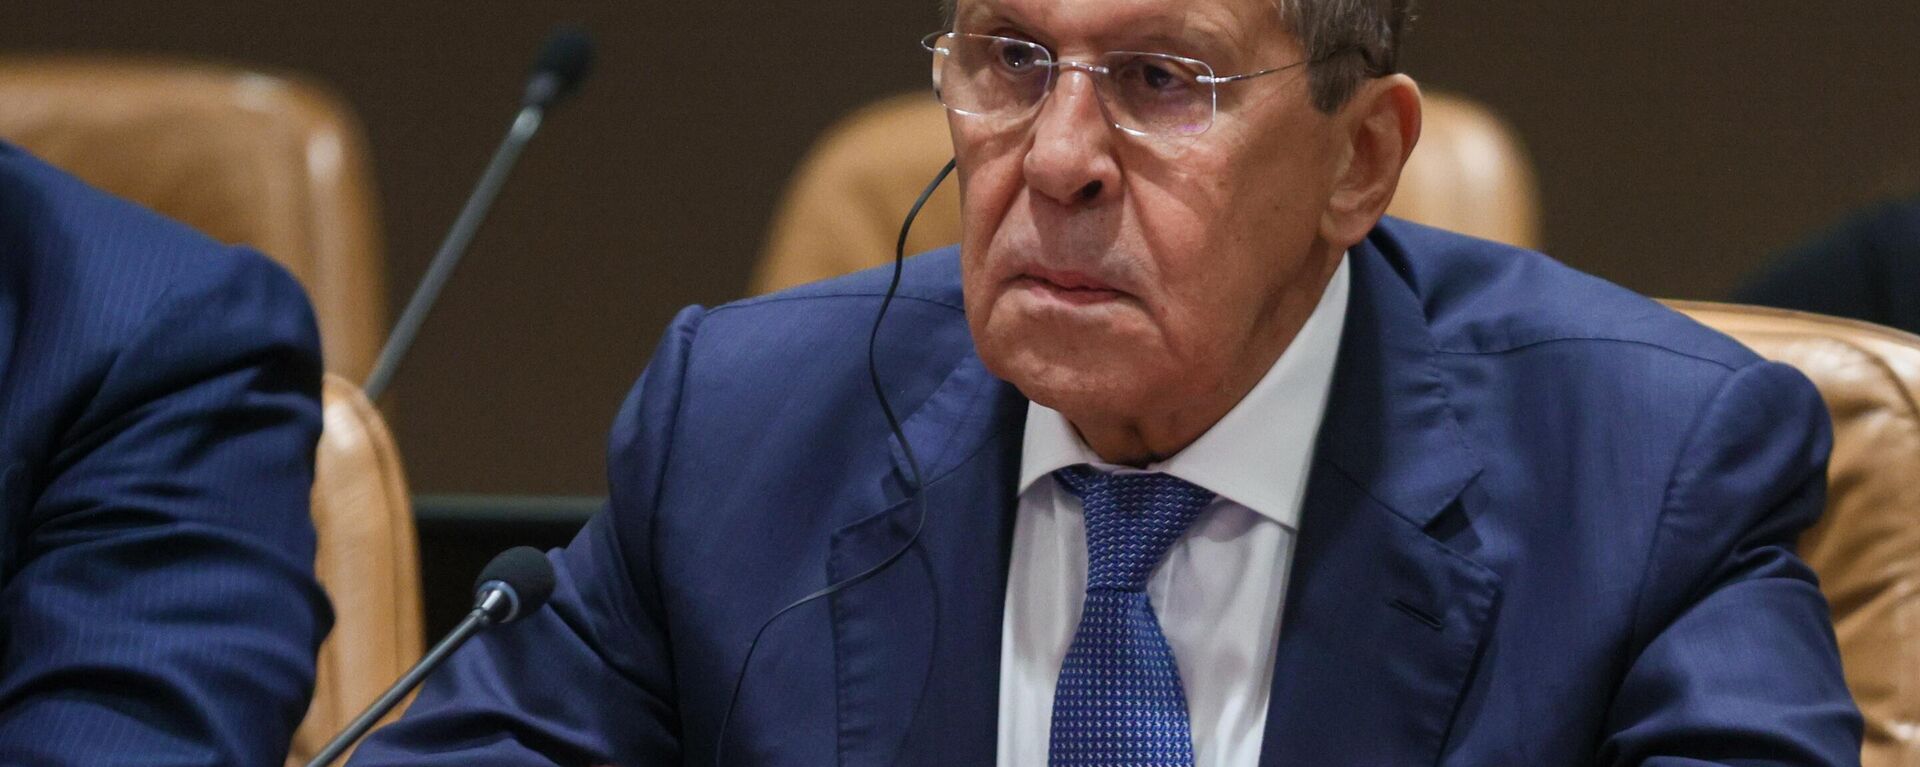 Russian Foreign Minister Sergei Lavrov during a meeting with his Chinese counterpart during the 77th session of the United Nations General Assembly in New York. - Sputnik International, 1920, 22.09.2022